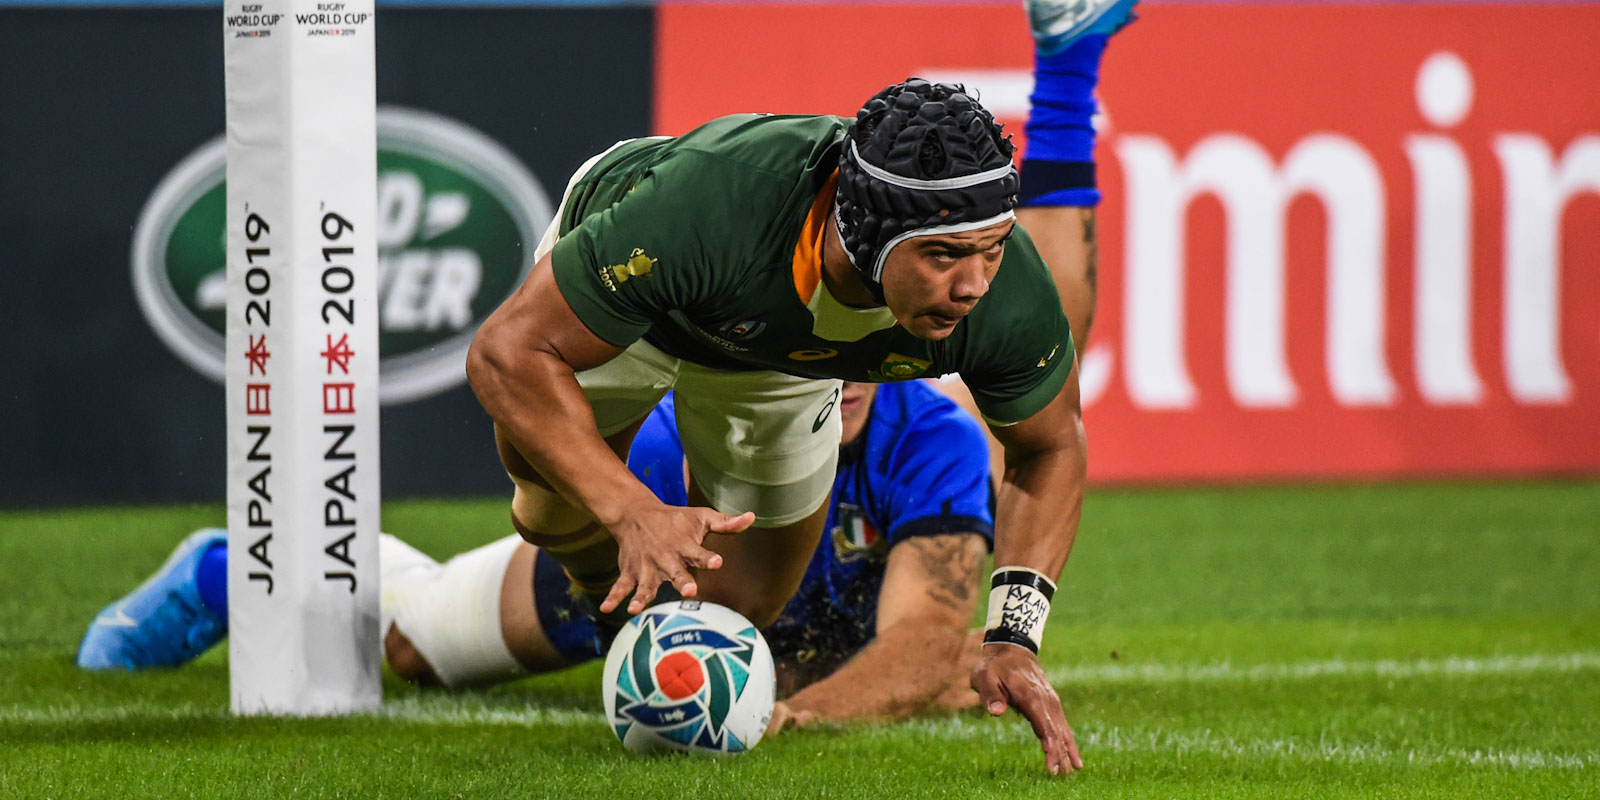 Springboks beat Italy at Rugby World Cup in Japan